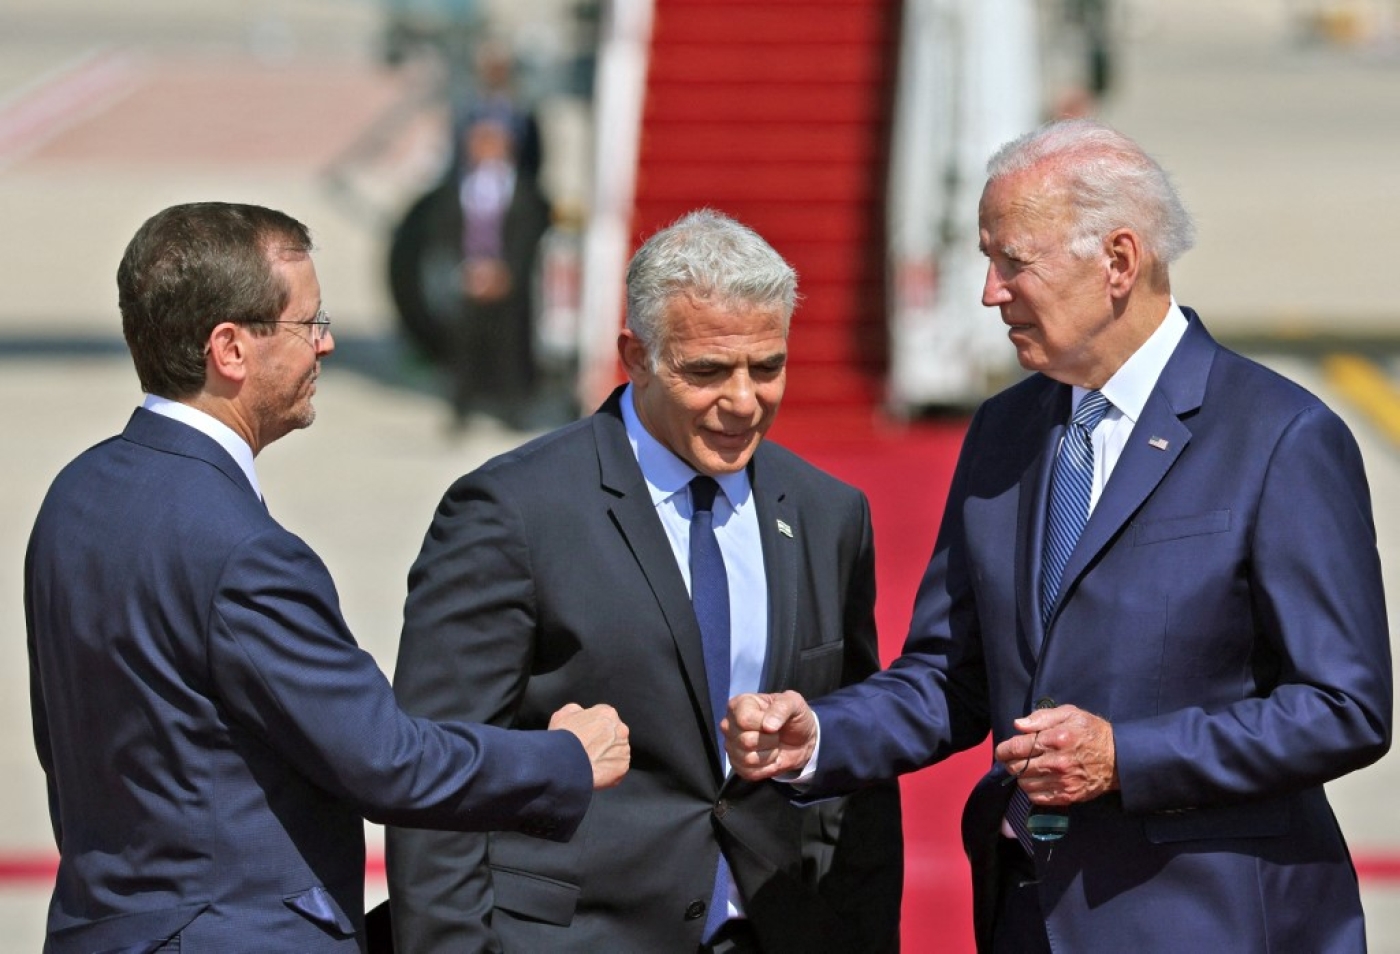 US President Joe Biden (R) bumps fists with Israel's President Isaac Herzog as caretaker Prime Minister Yair Lapid looks on, at Israel's Ben Gurion Airport in Lod near Tel Aviv, on 13 July 2022. (AFP)